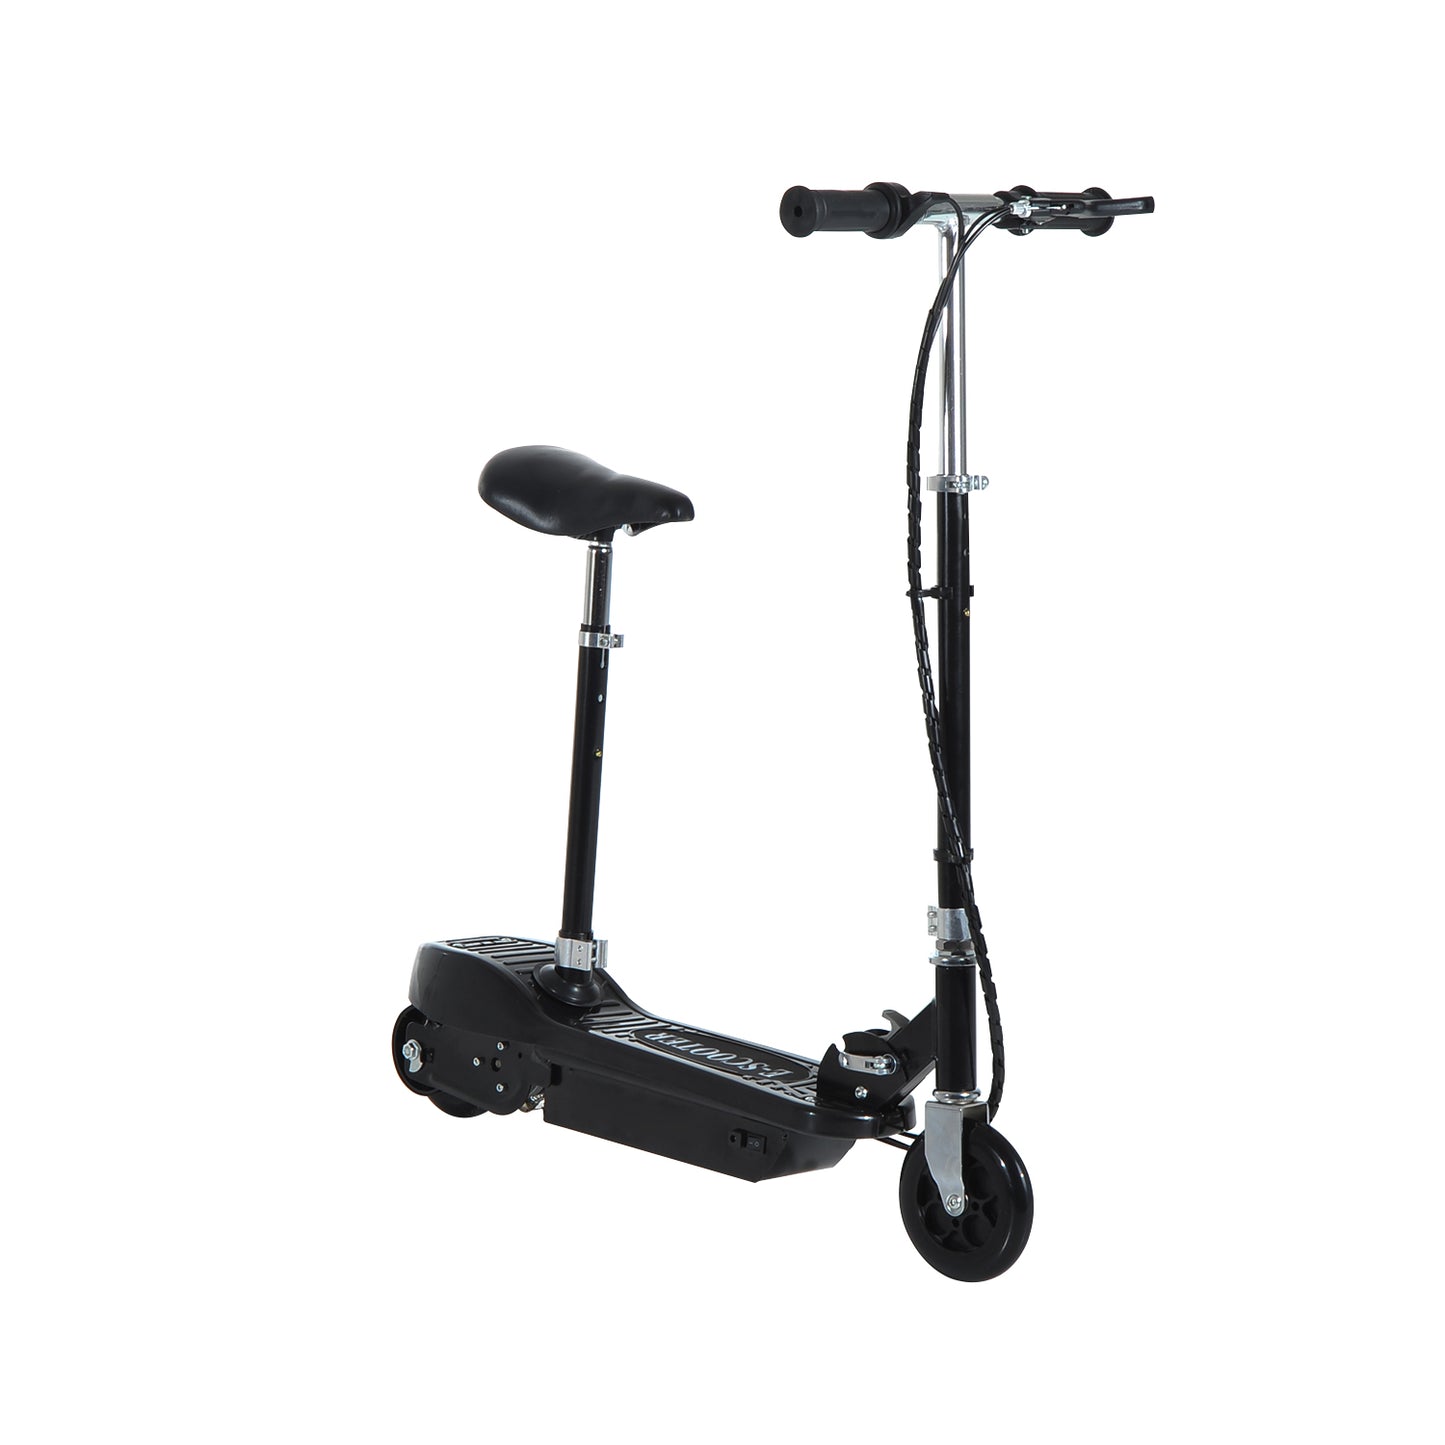 HOMCOM Motorized Electric Scooter, Rechargeable Battery-Black